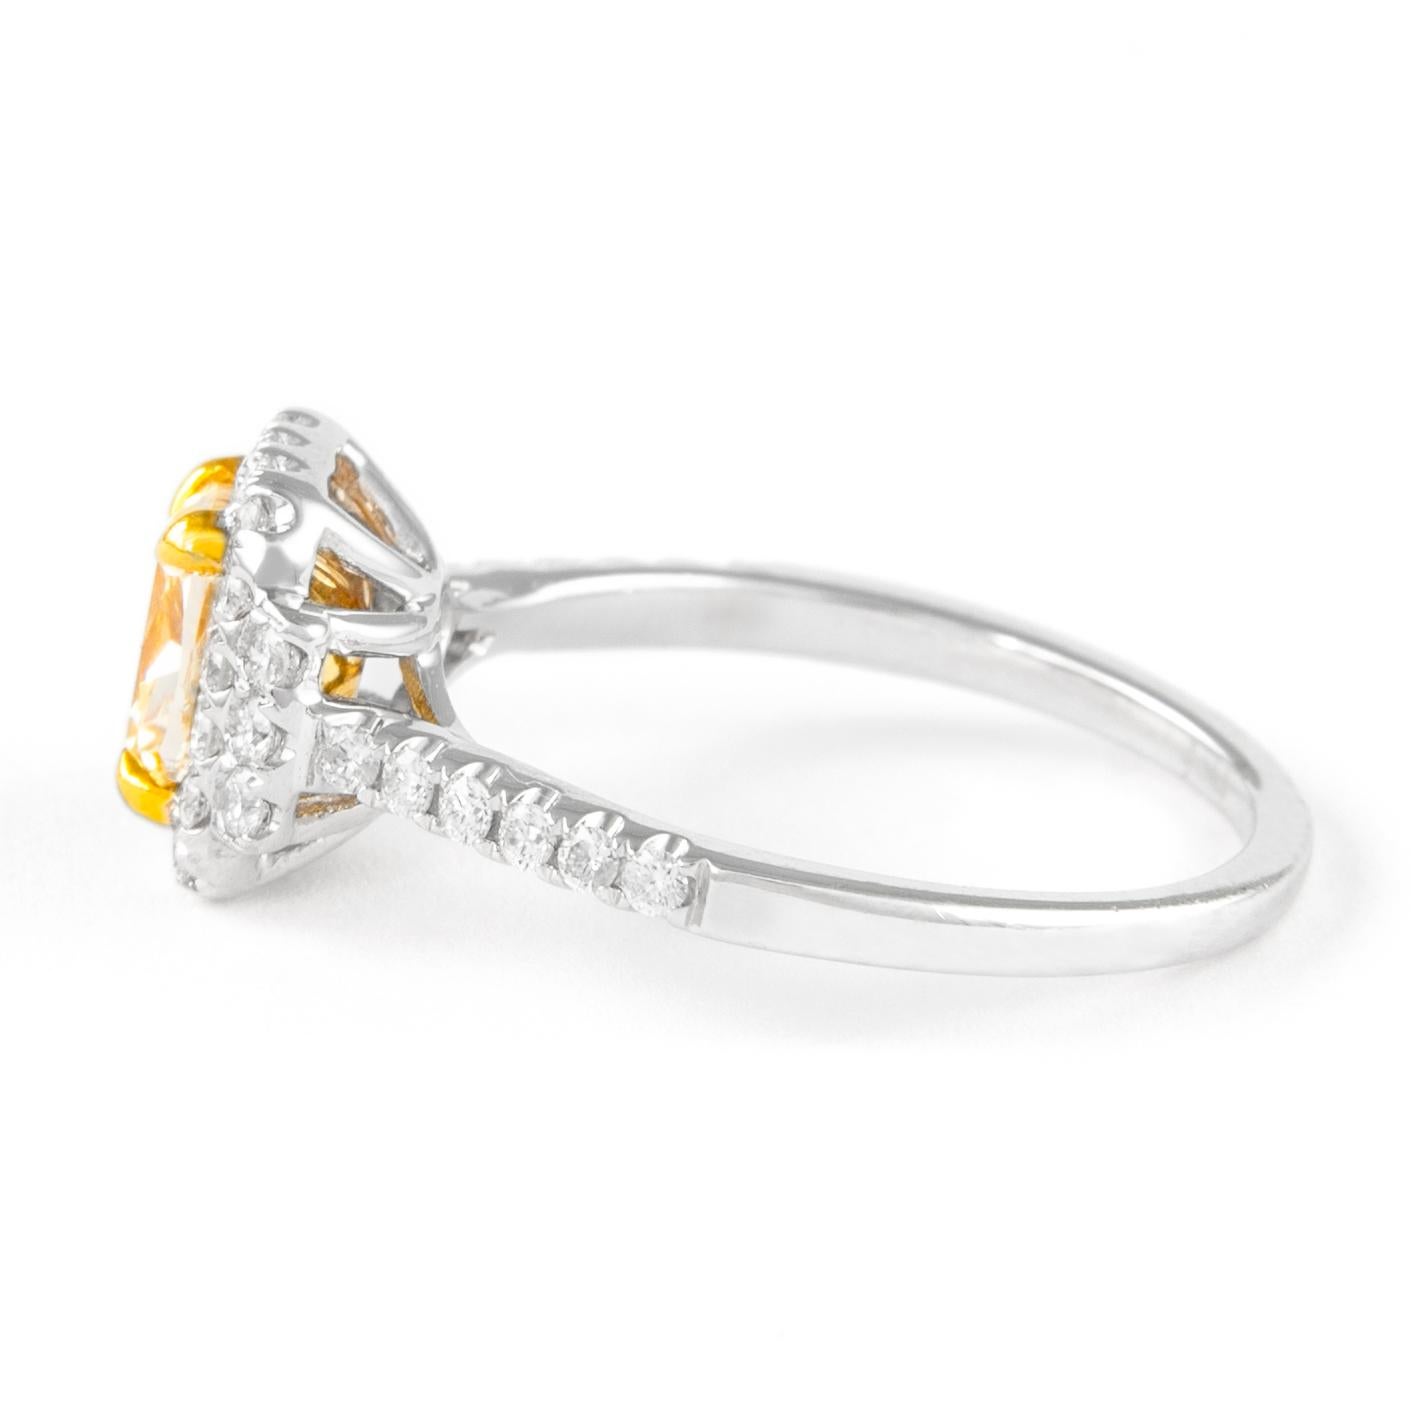 Cushion Cut Alexander 1.39ctt Fancy Yellow VS2 Cushion Diamond with Halo Ring 18k Two Tone For Sale